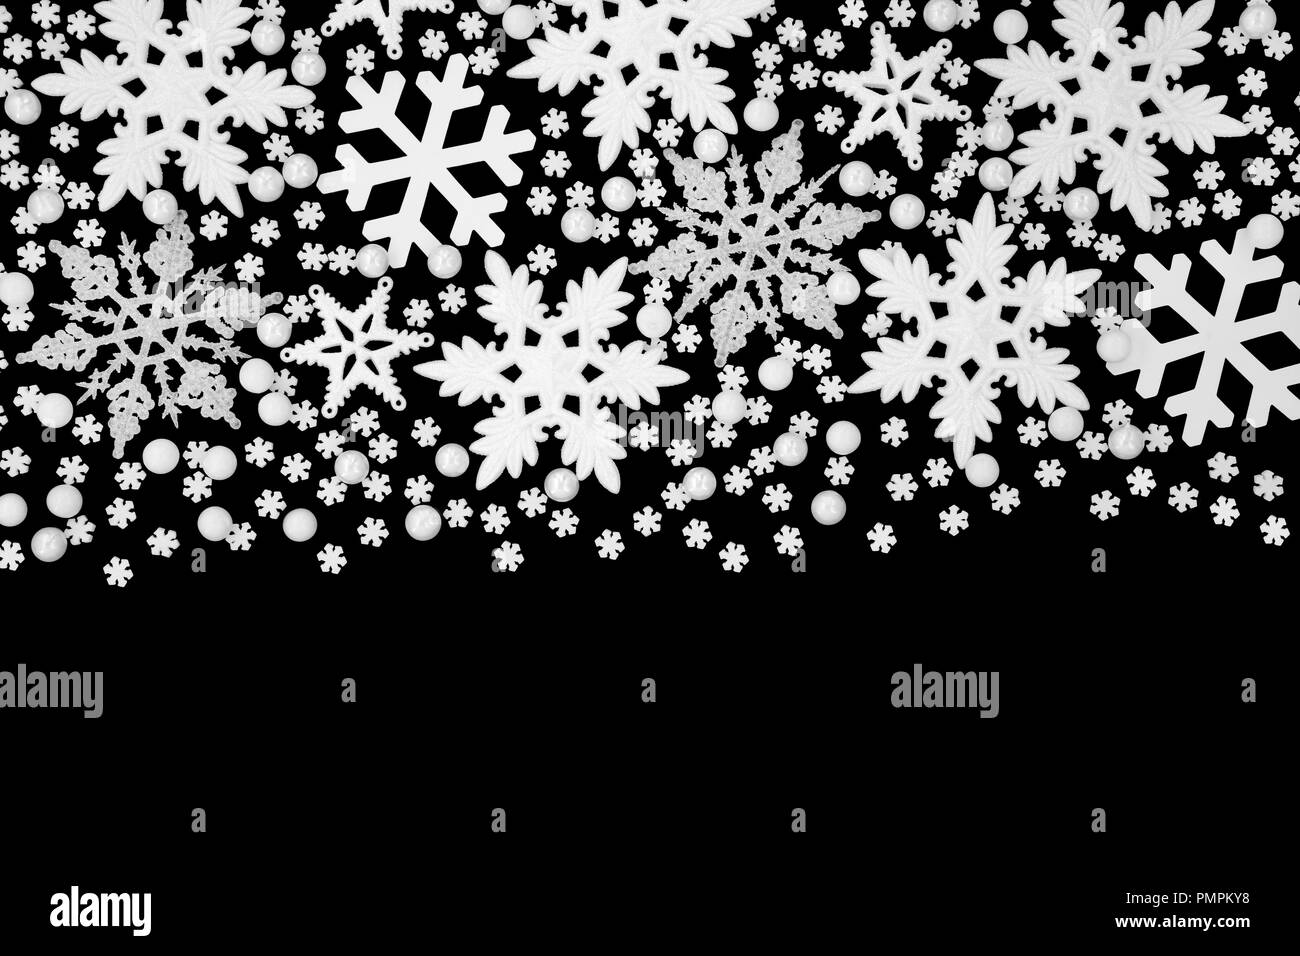 Christmas white snowflake and ball bauble abstract border on black background with copy space. Stock Photo